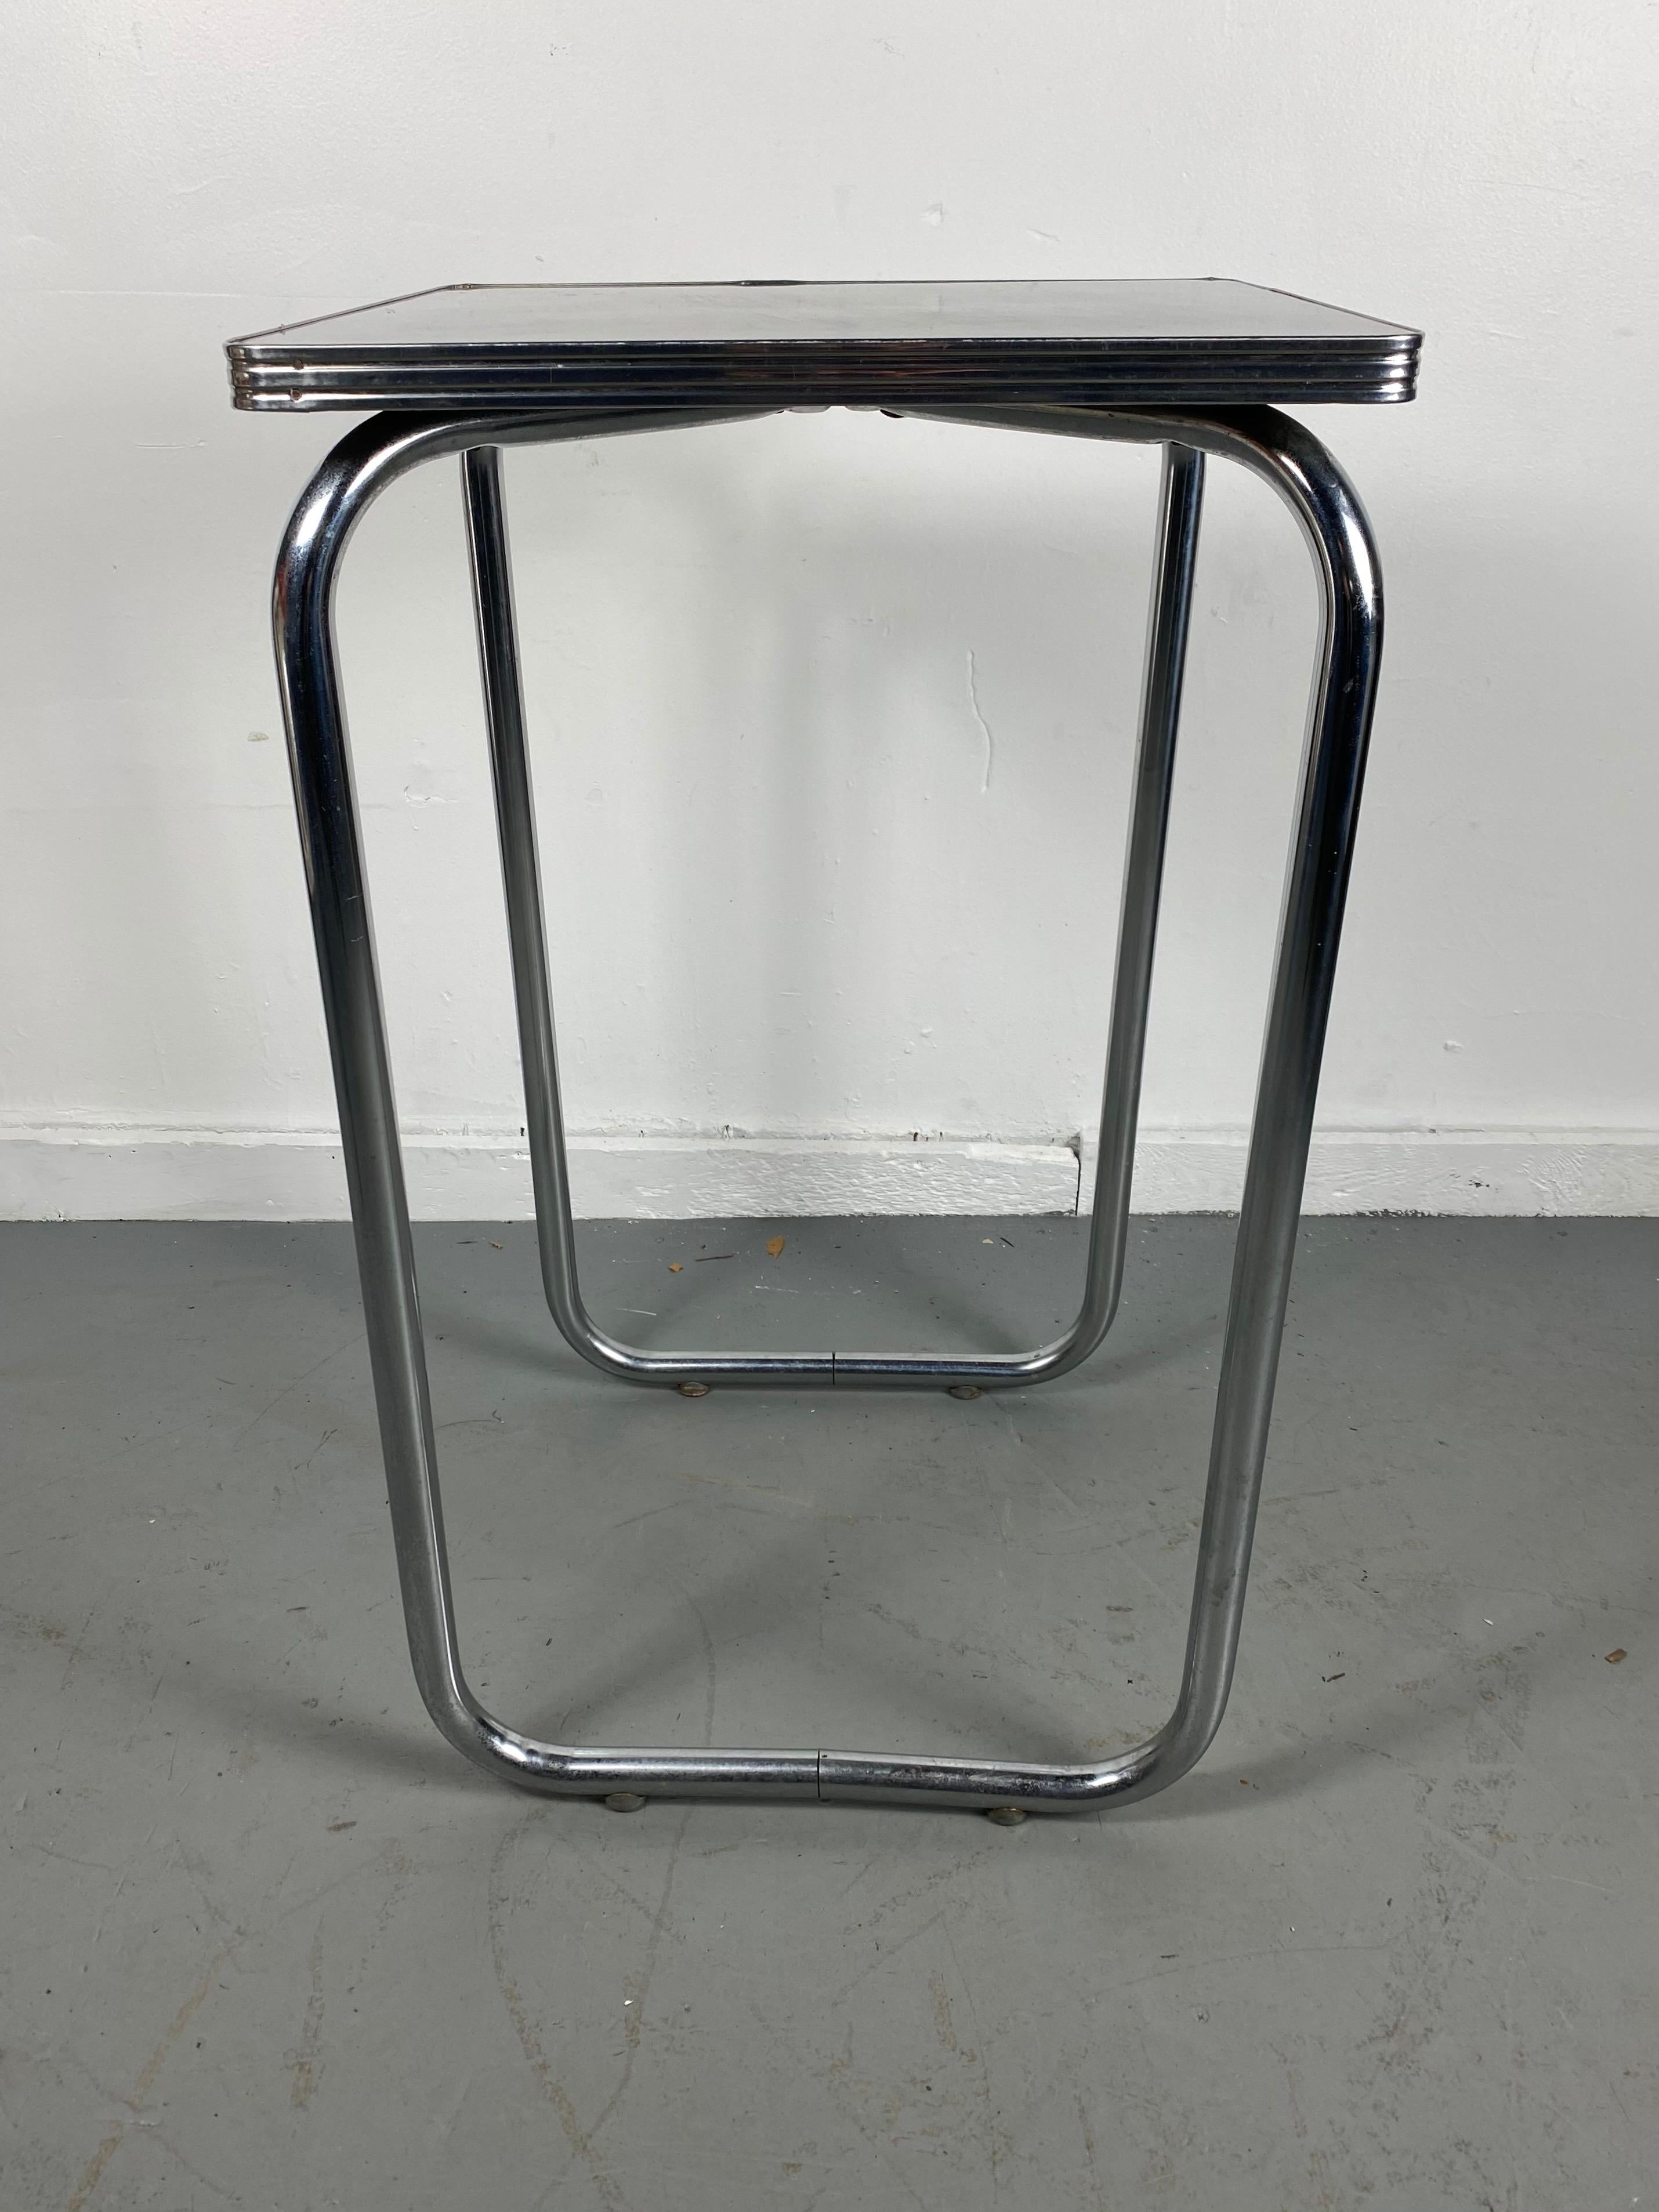 Unusual Bauhaus Style Black and Tubular Chrome Table / Stand / Wolfgang Hoffmann For Sale 1